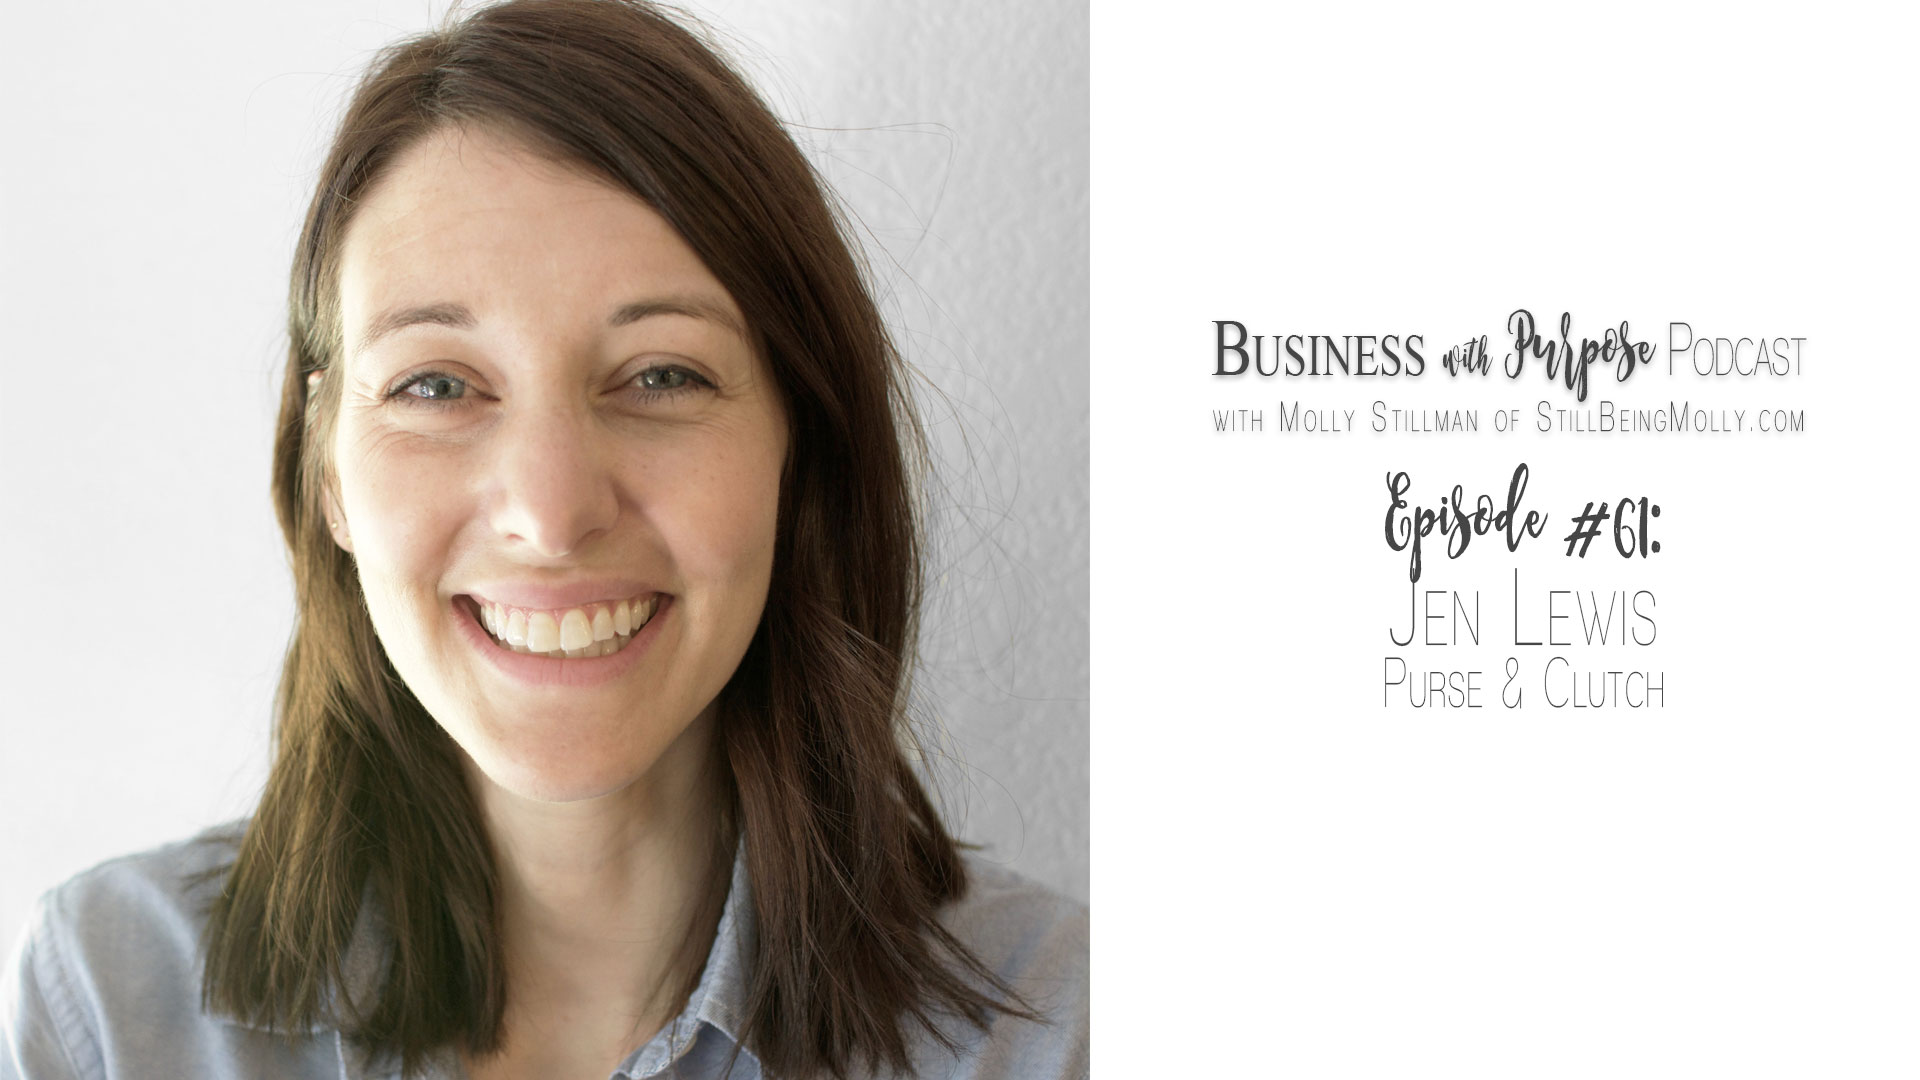 Business with Purpose Podcast EP 61: Jen Lewis, Founder of Purse and Clutch by North Carolina ethical blogger Still Being Molly